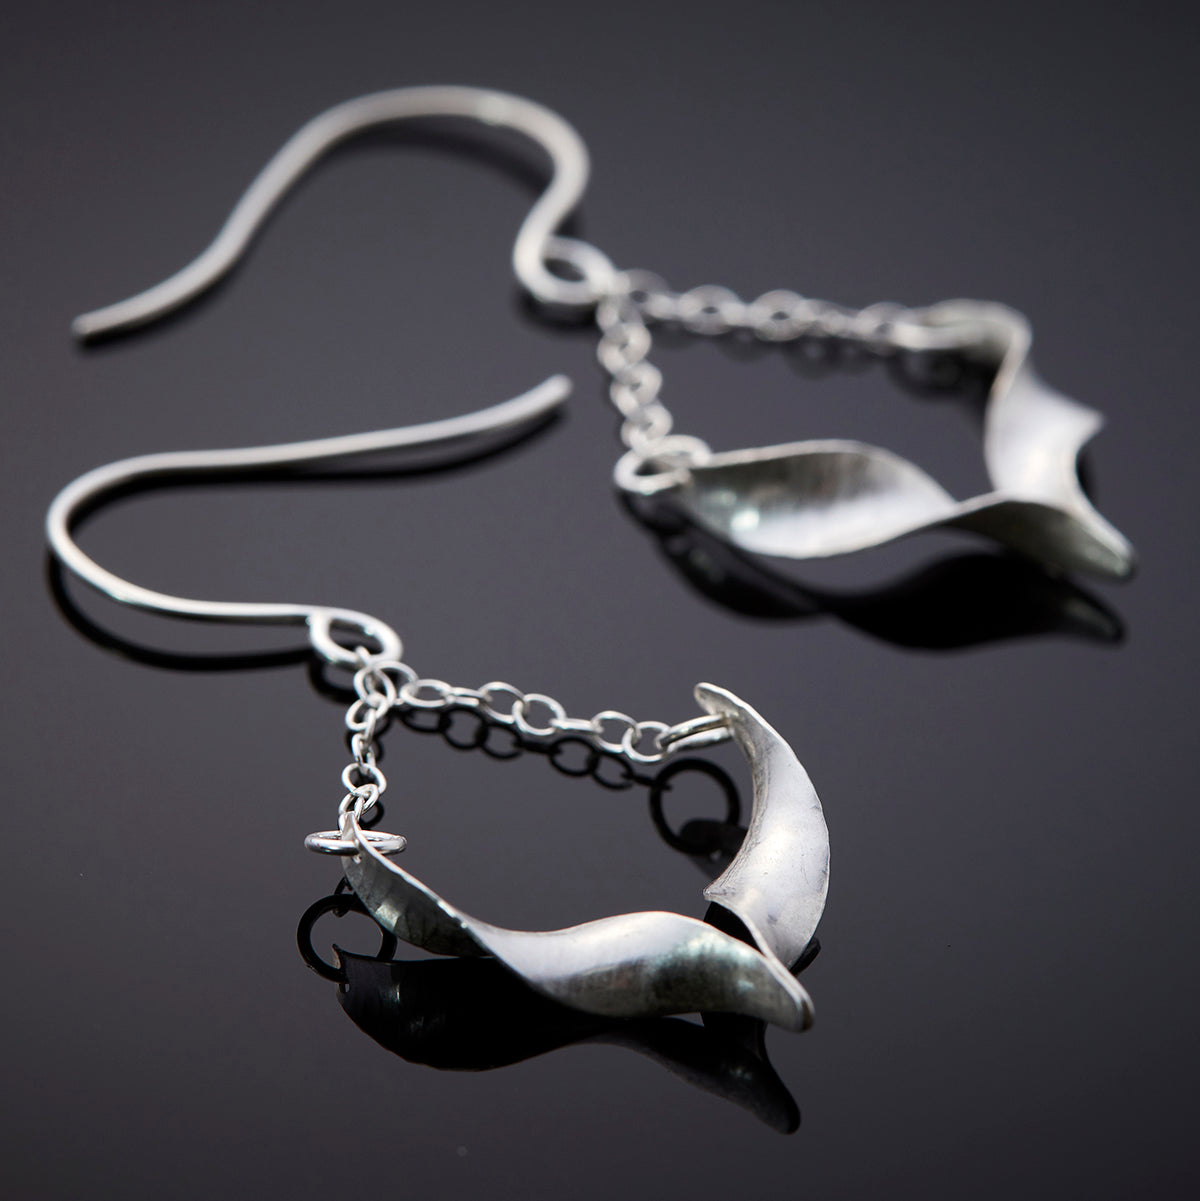 A pair of sculptural silver bird earrings. Each is composed of two twists of hammered silver joined at the central point and hanging from a handmade hook by means of delicate trace chain. They have a hammered texture, non-reflective finish and burnished edges. The back of one of the earrings is shown in the foreground, from an angle which shows the central join.